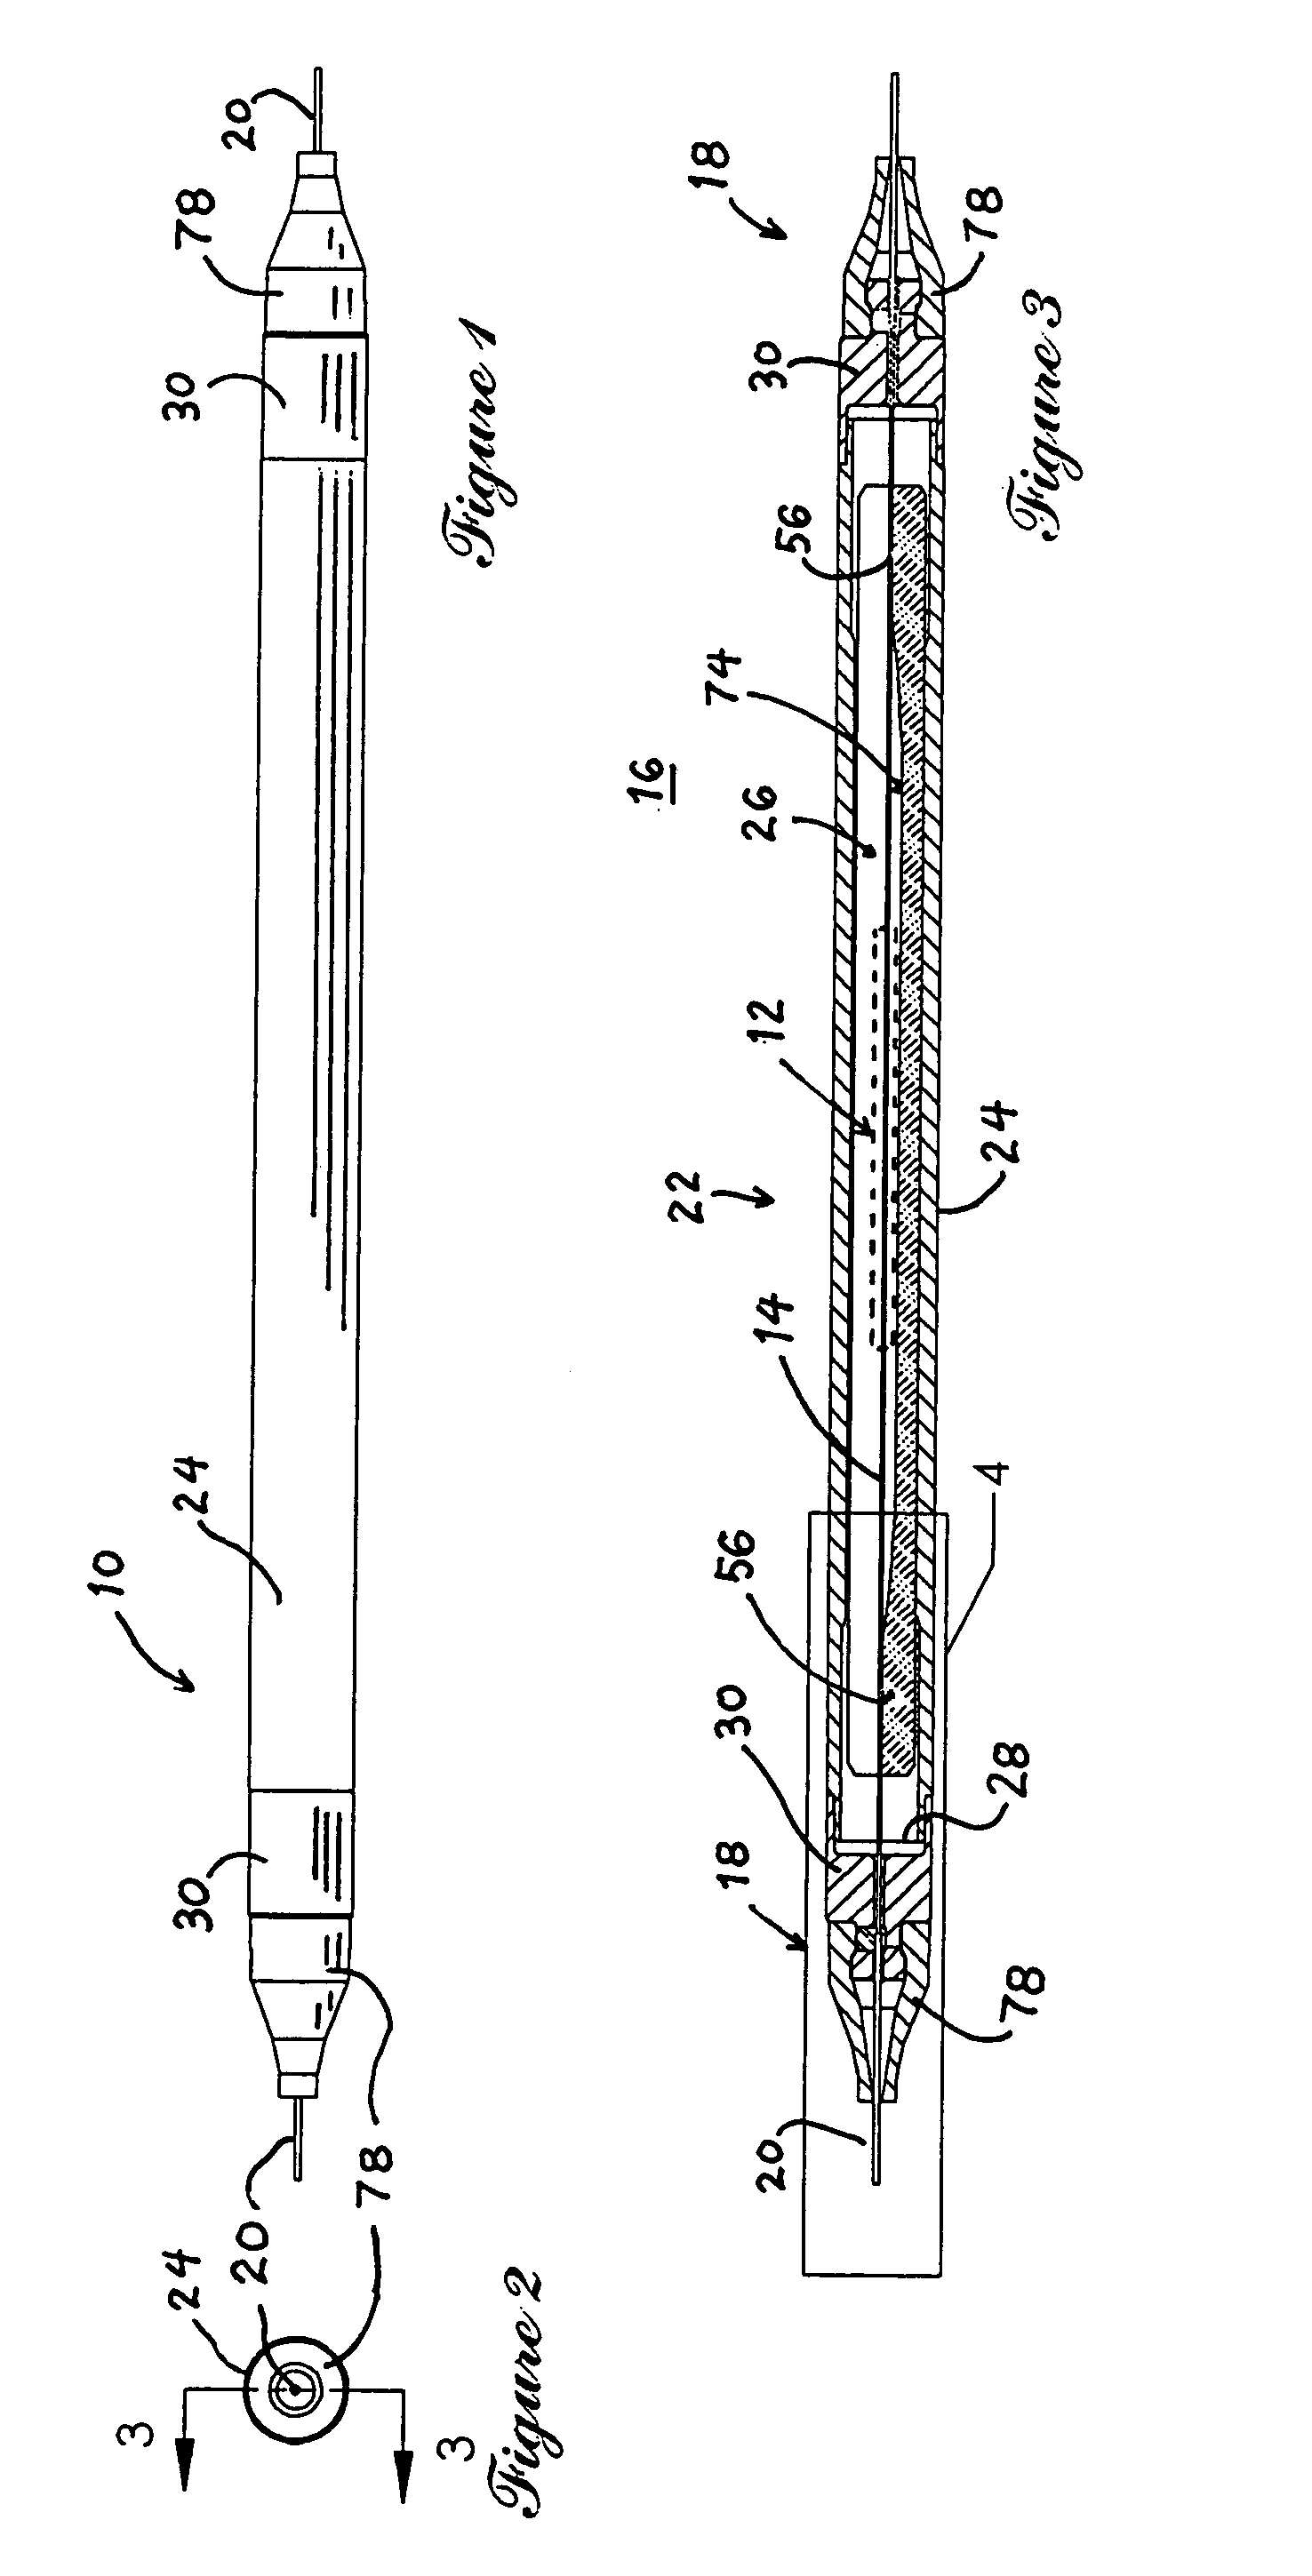 Optical component packaging device